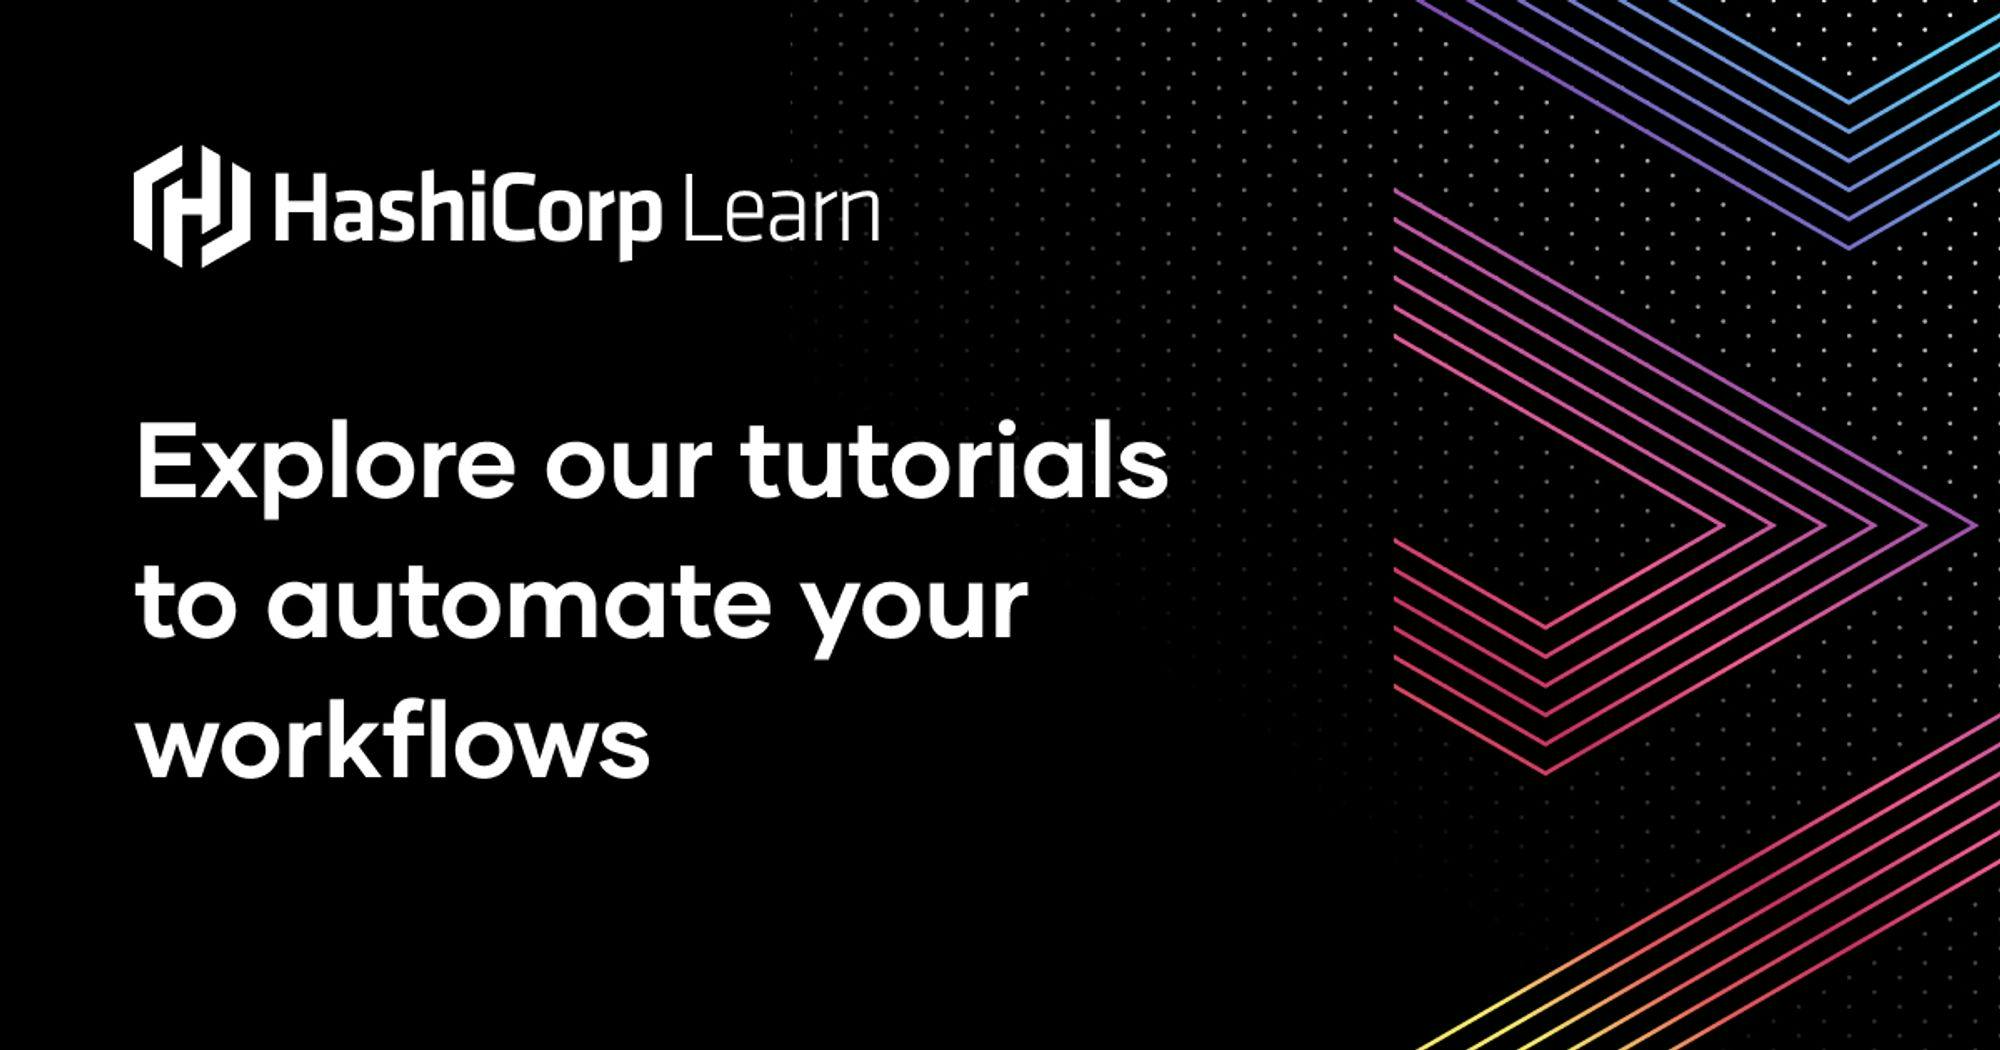 Consul with Containers | Consul - HashiCorp Learn